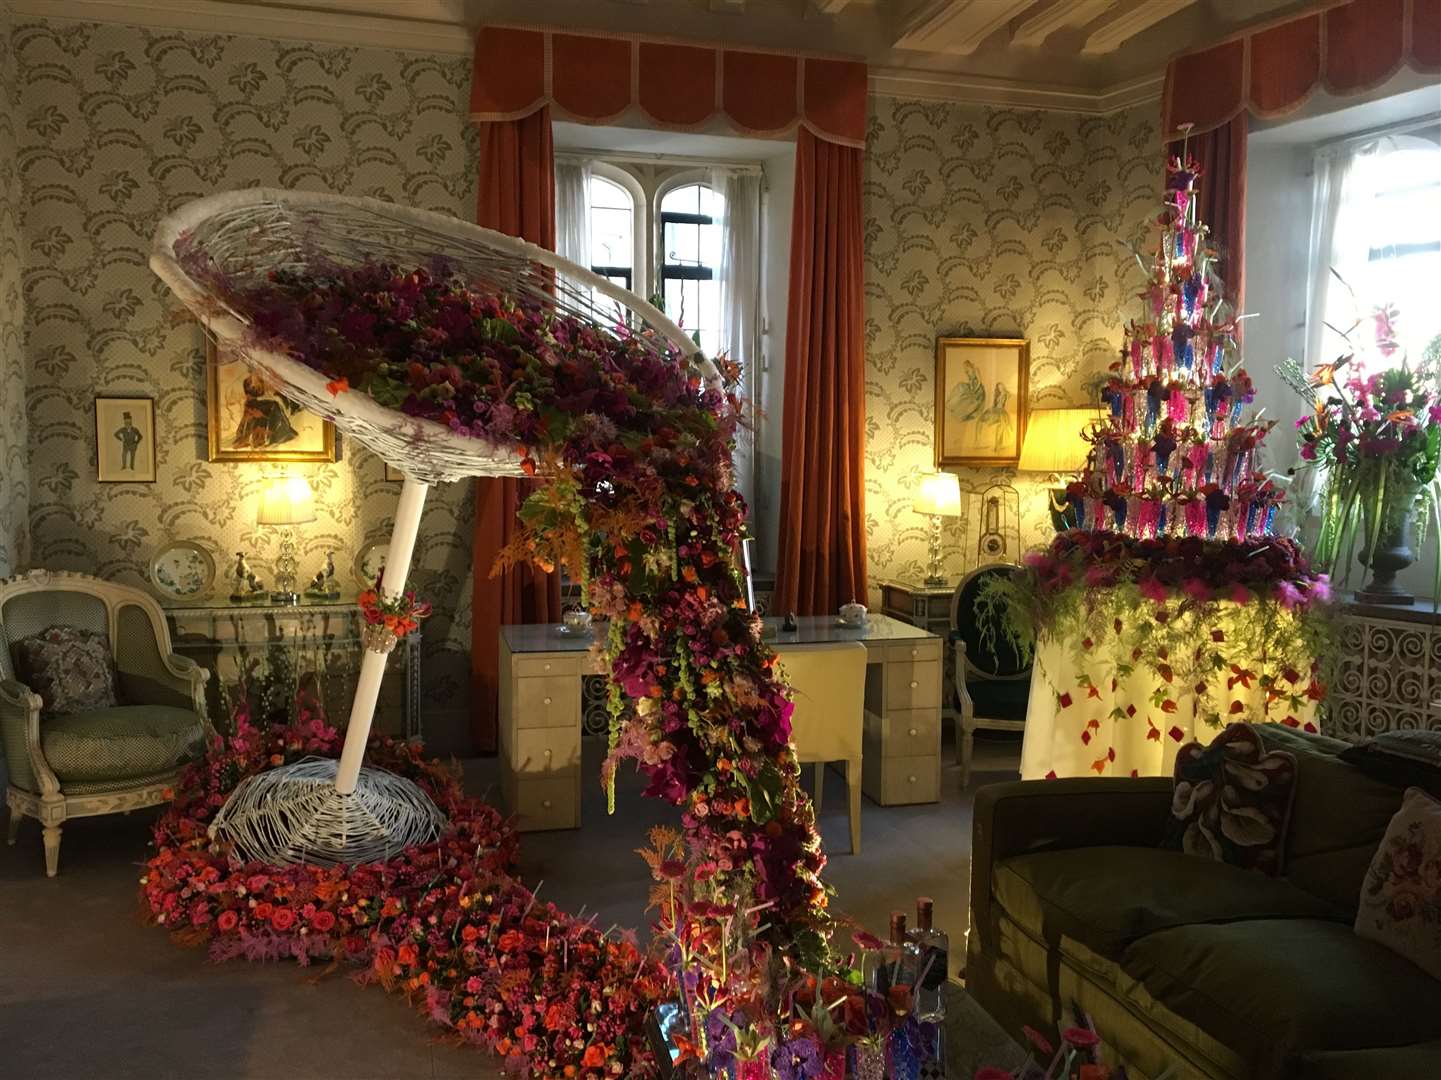 Colour plays a part in the Festival of Flowers designs at Leeds Castle